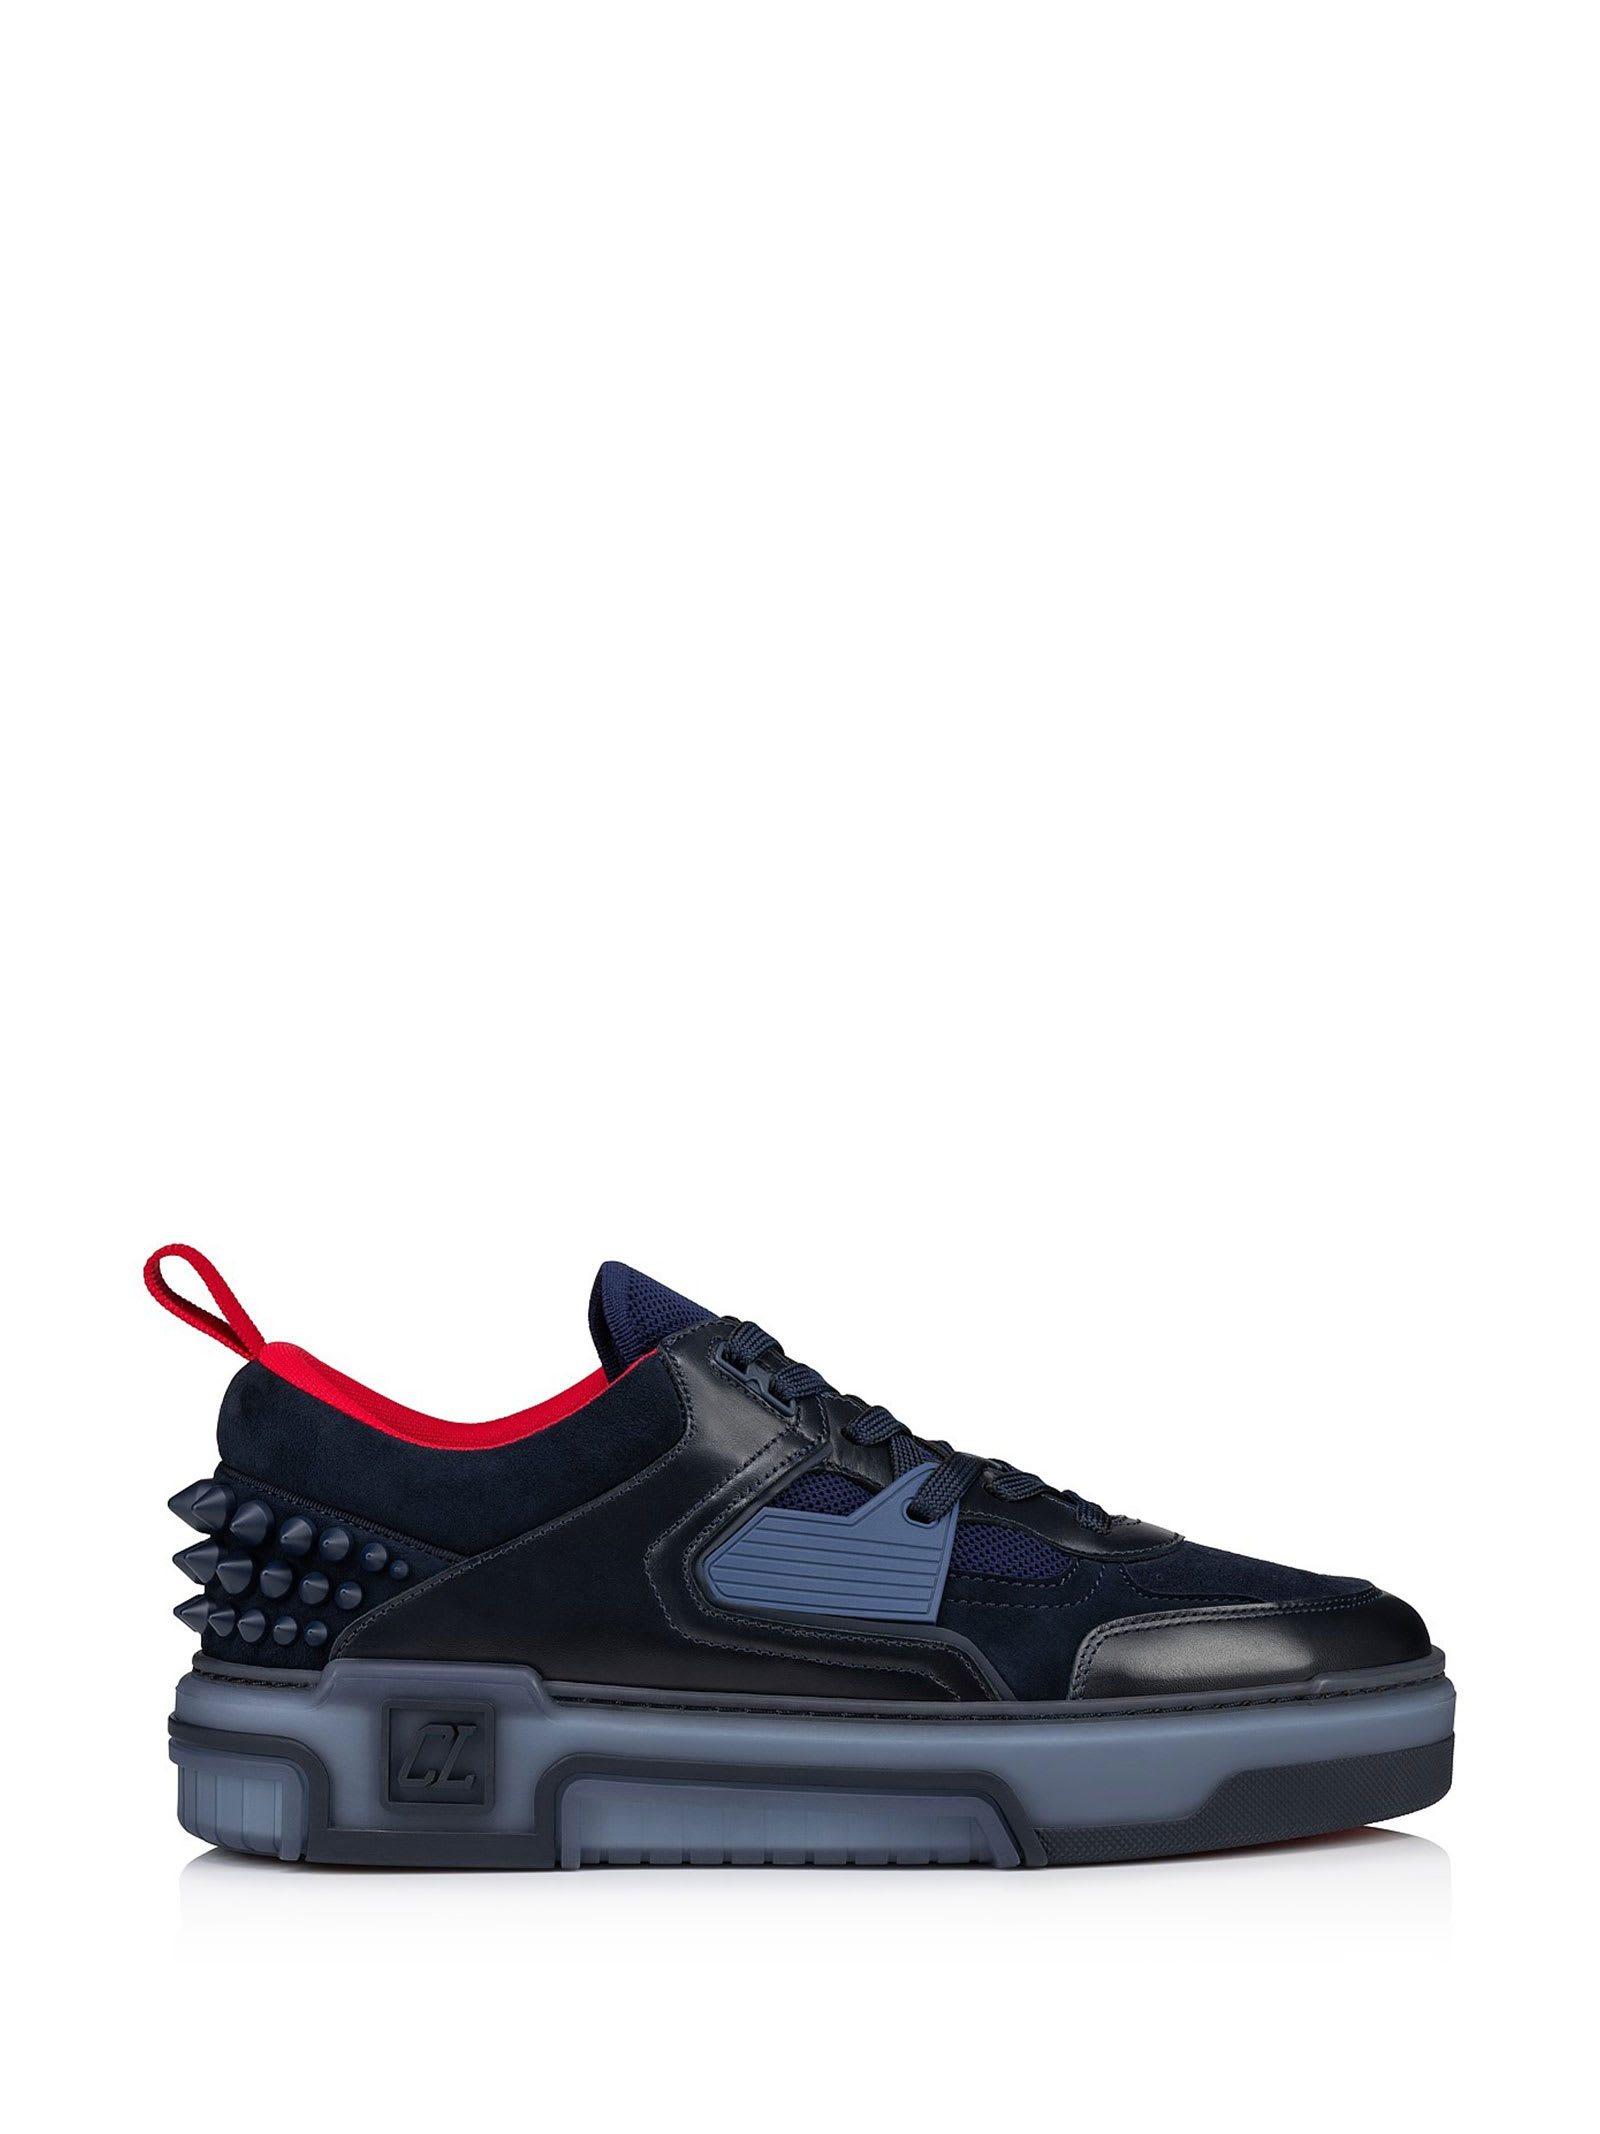 Shop Christian Louboutin Astroloubi Sneakers In Calf Leather And Suede In Marine